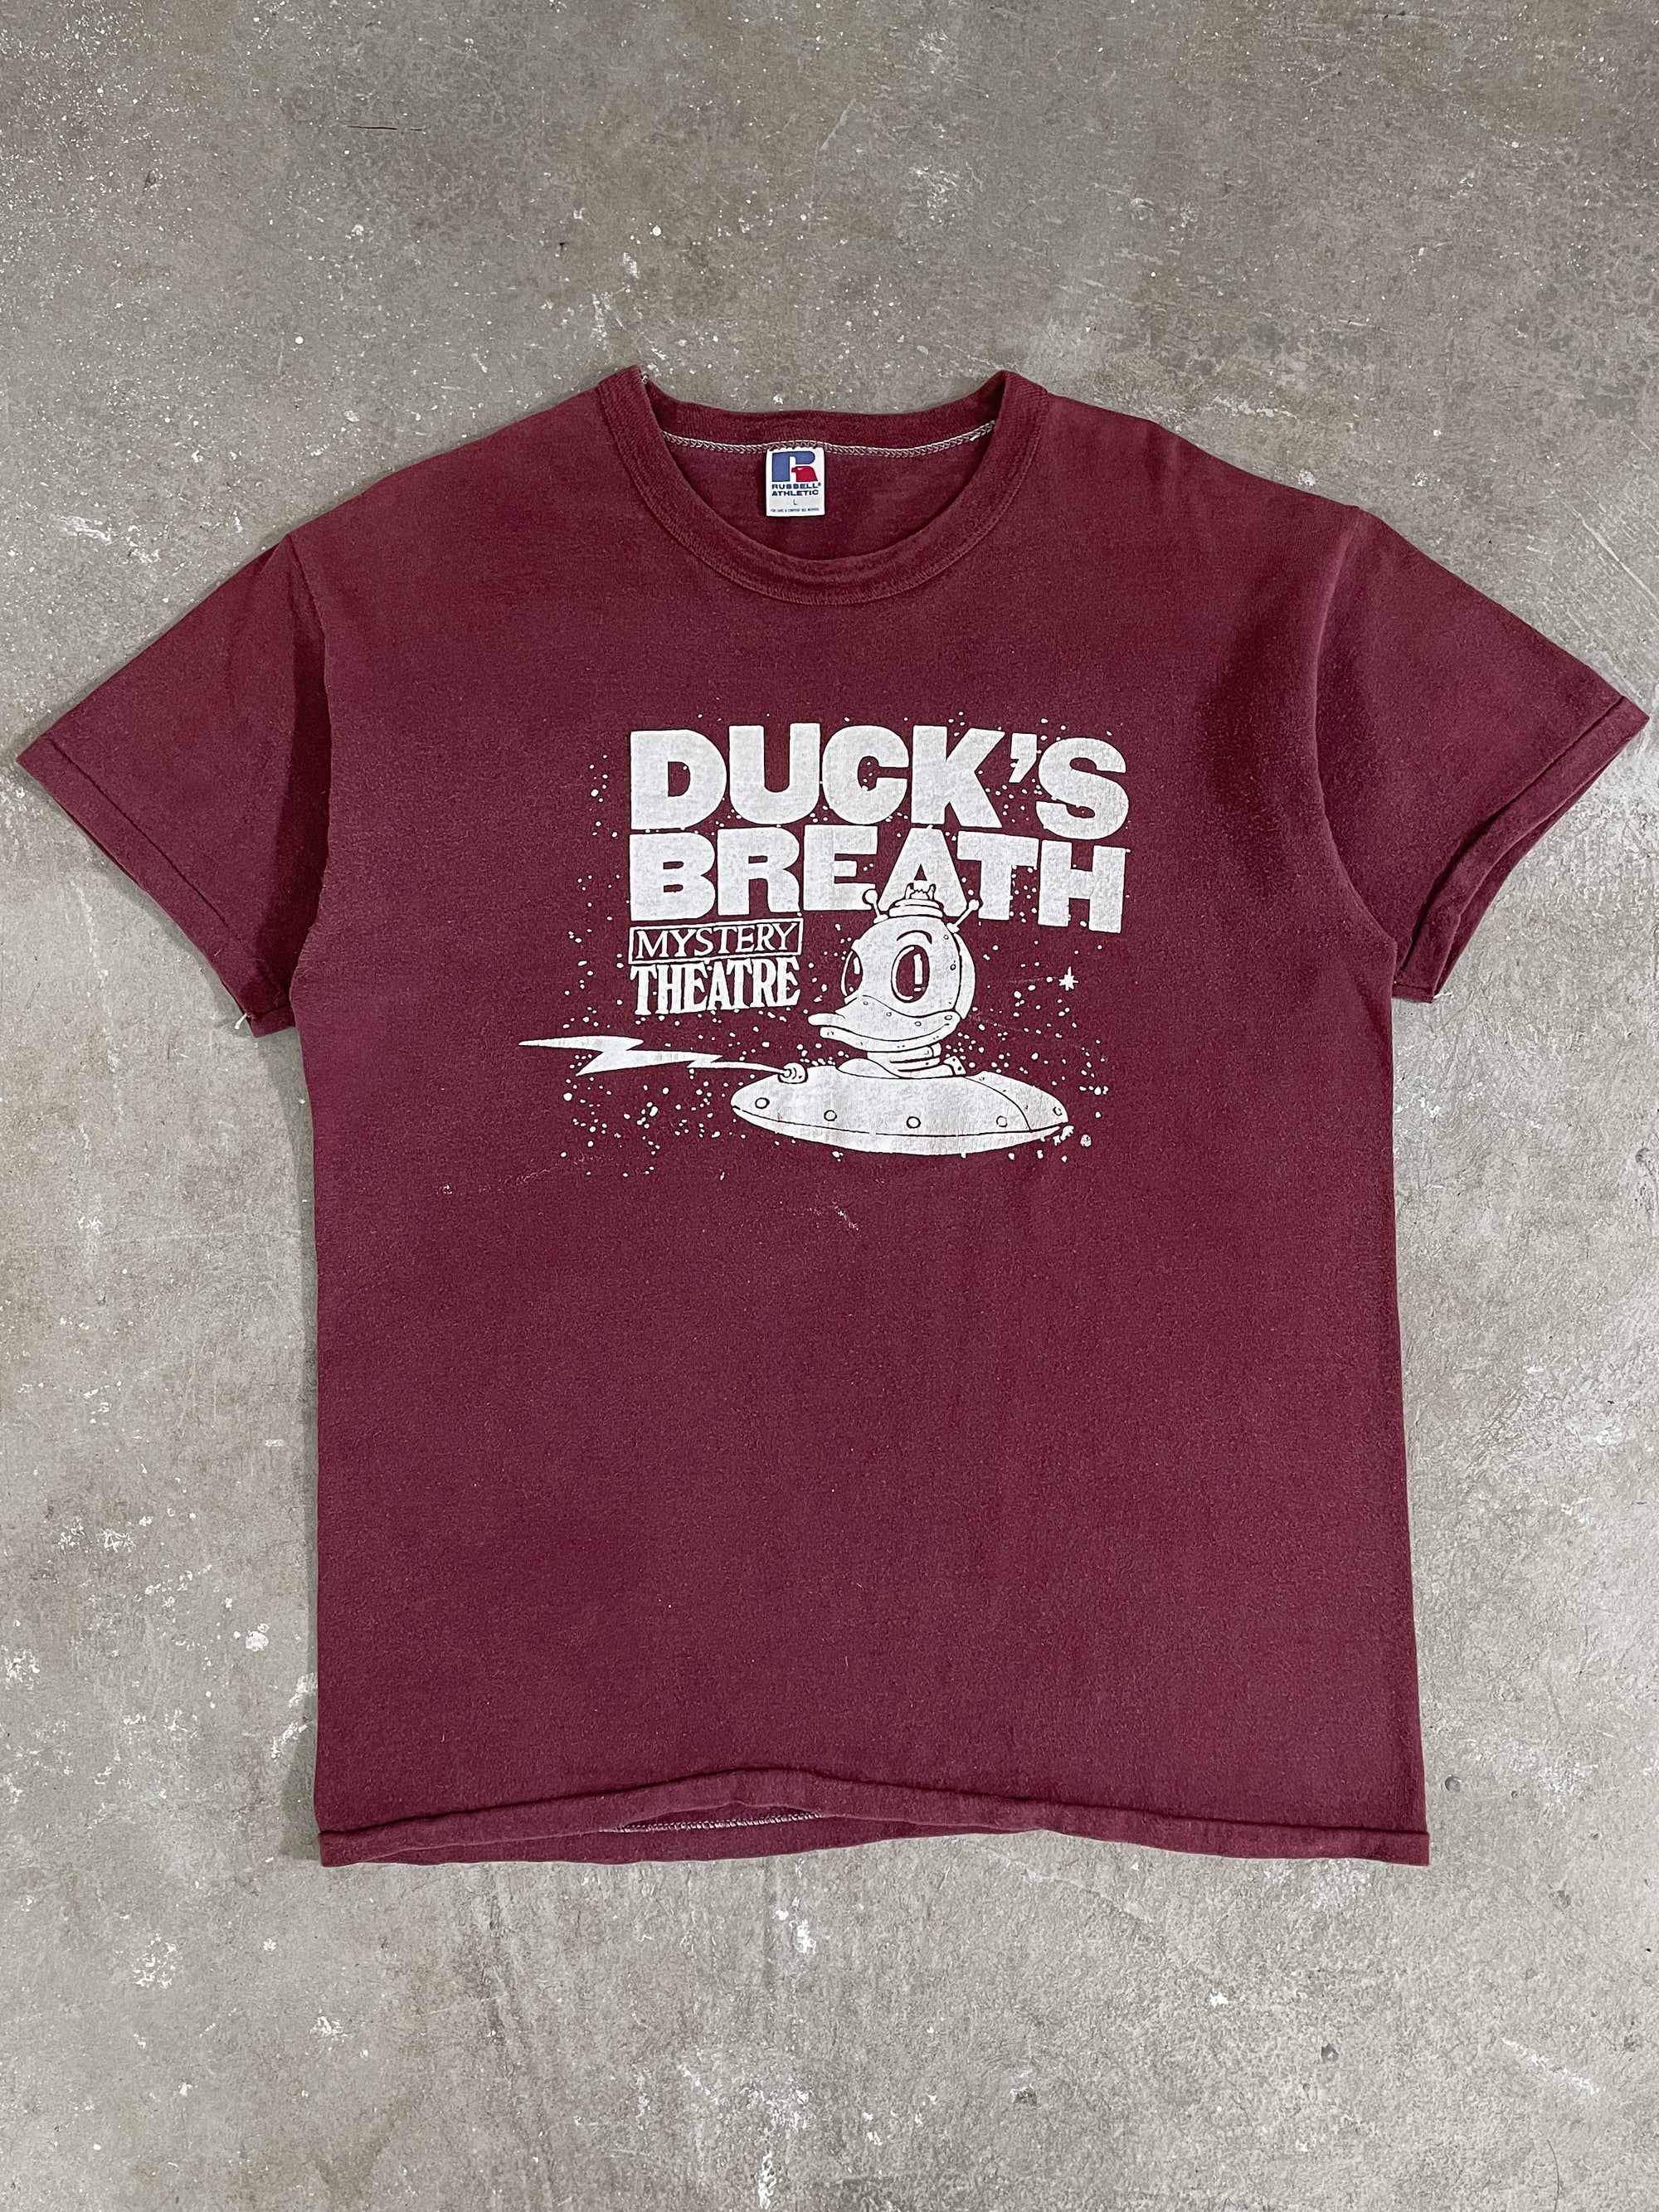 1980s Russell “Duck’s Breath” Tee (M)